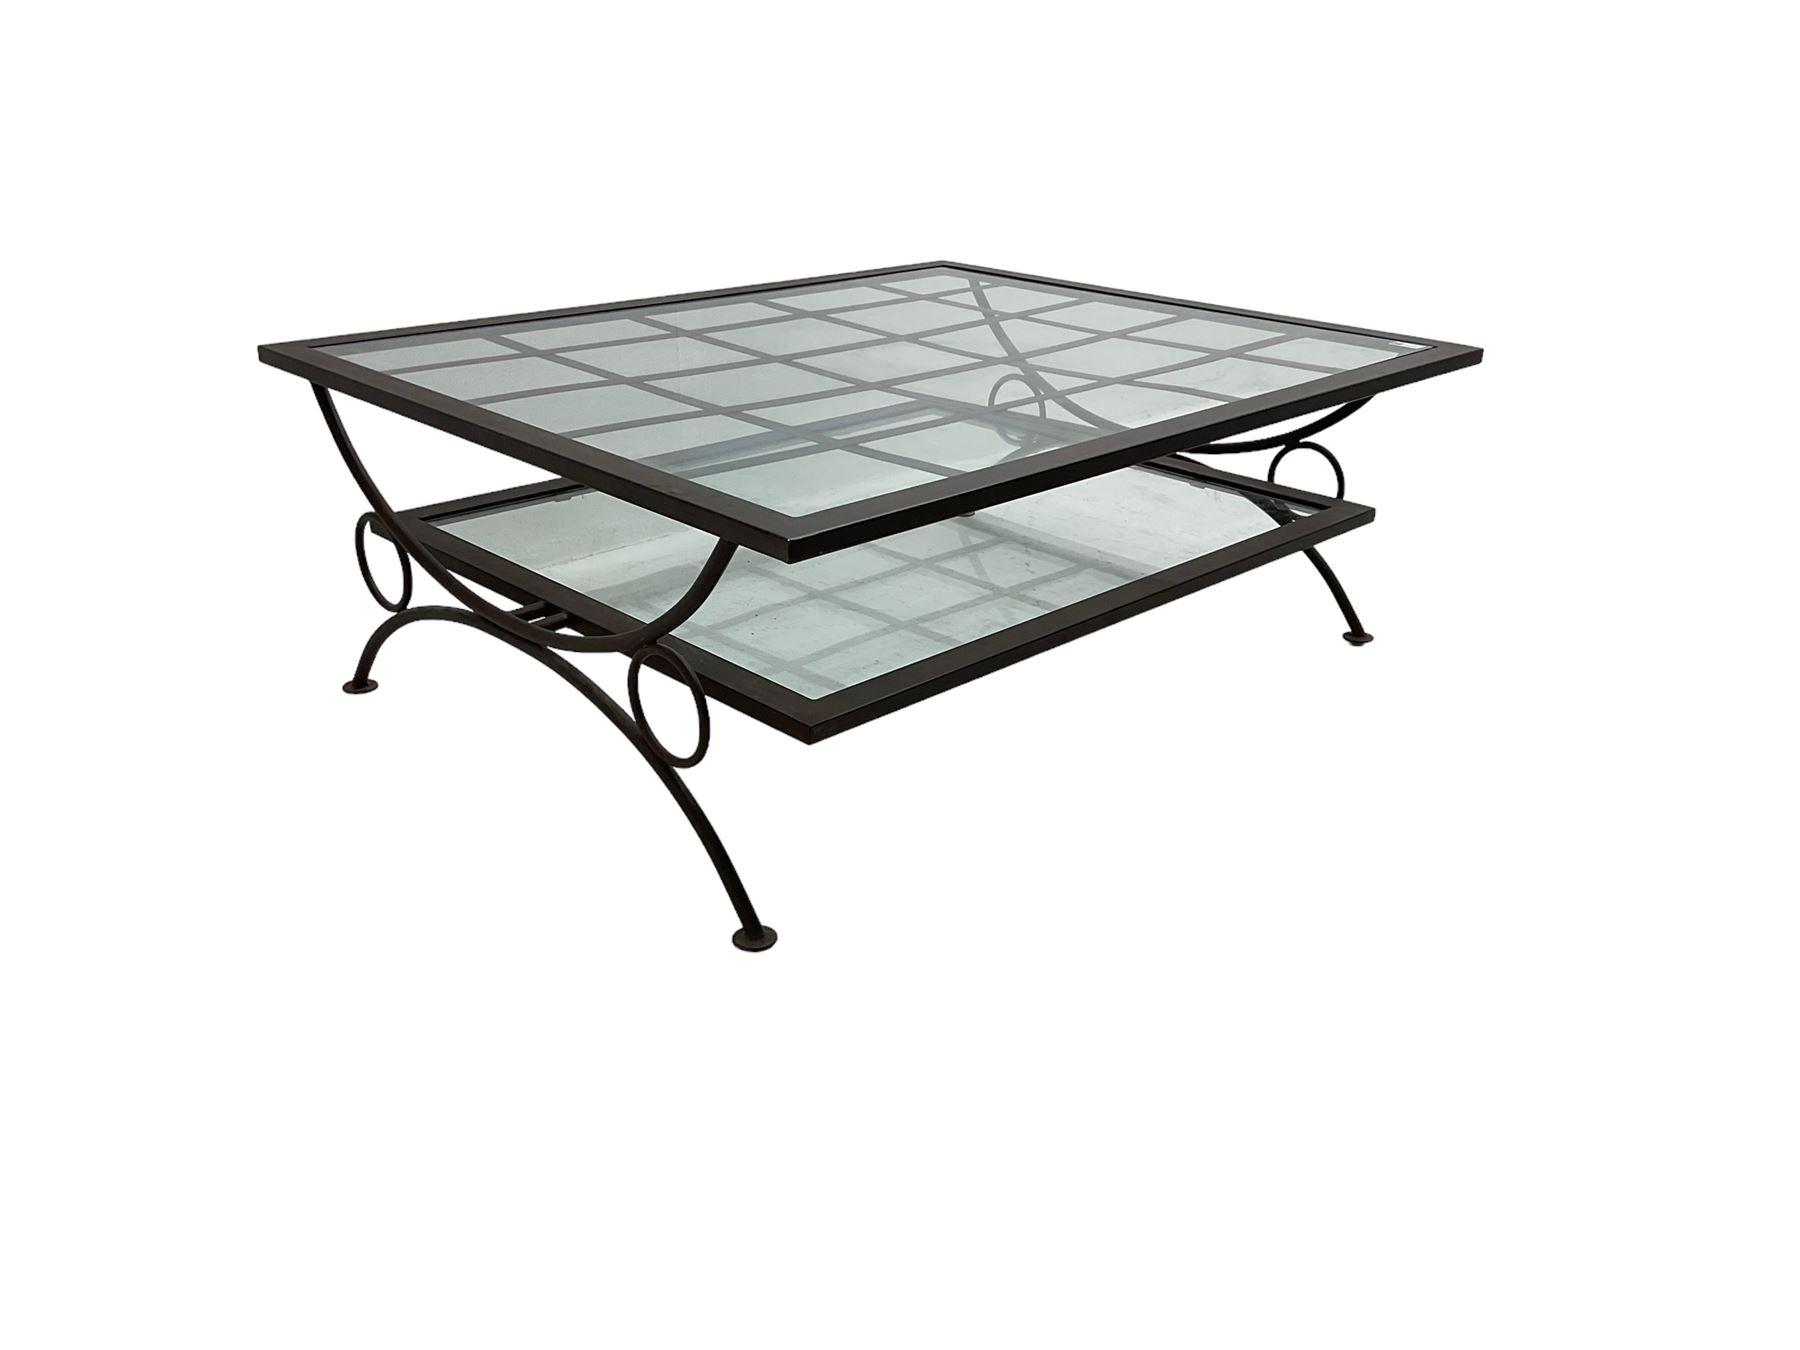 Wrought metal coffee table - Image 3 of 6